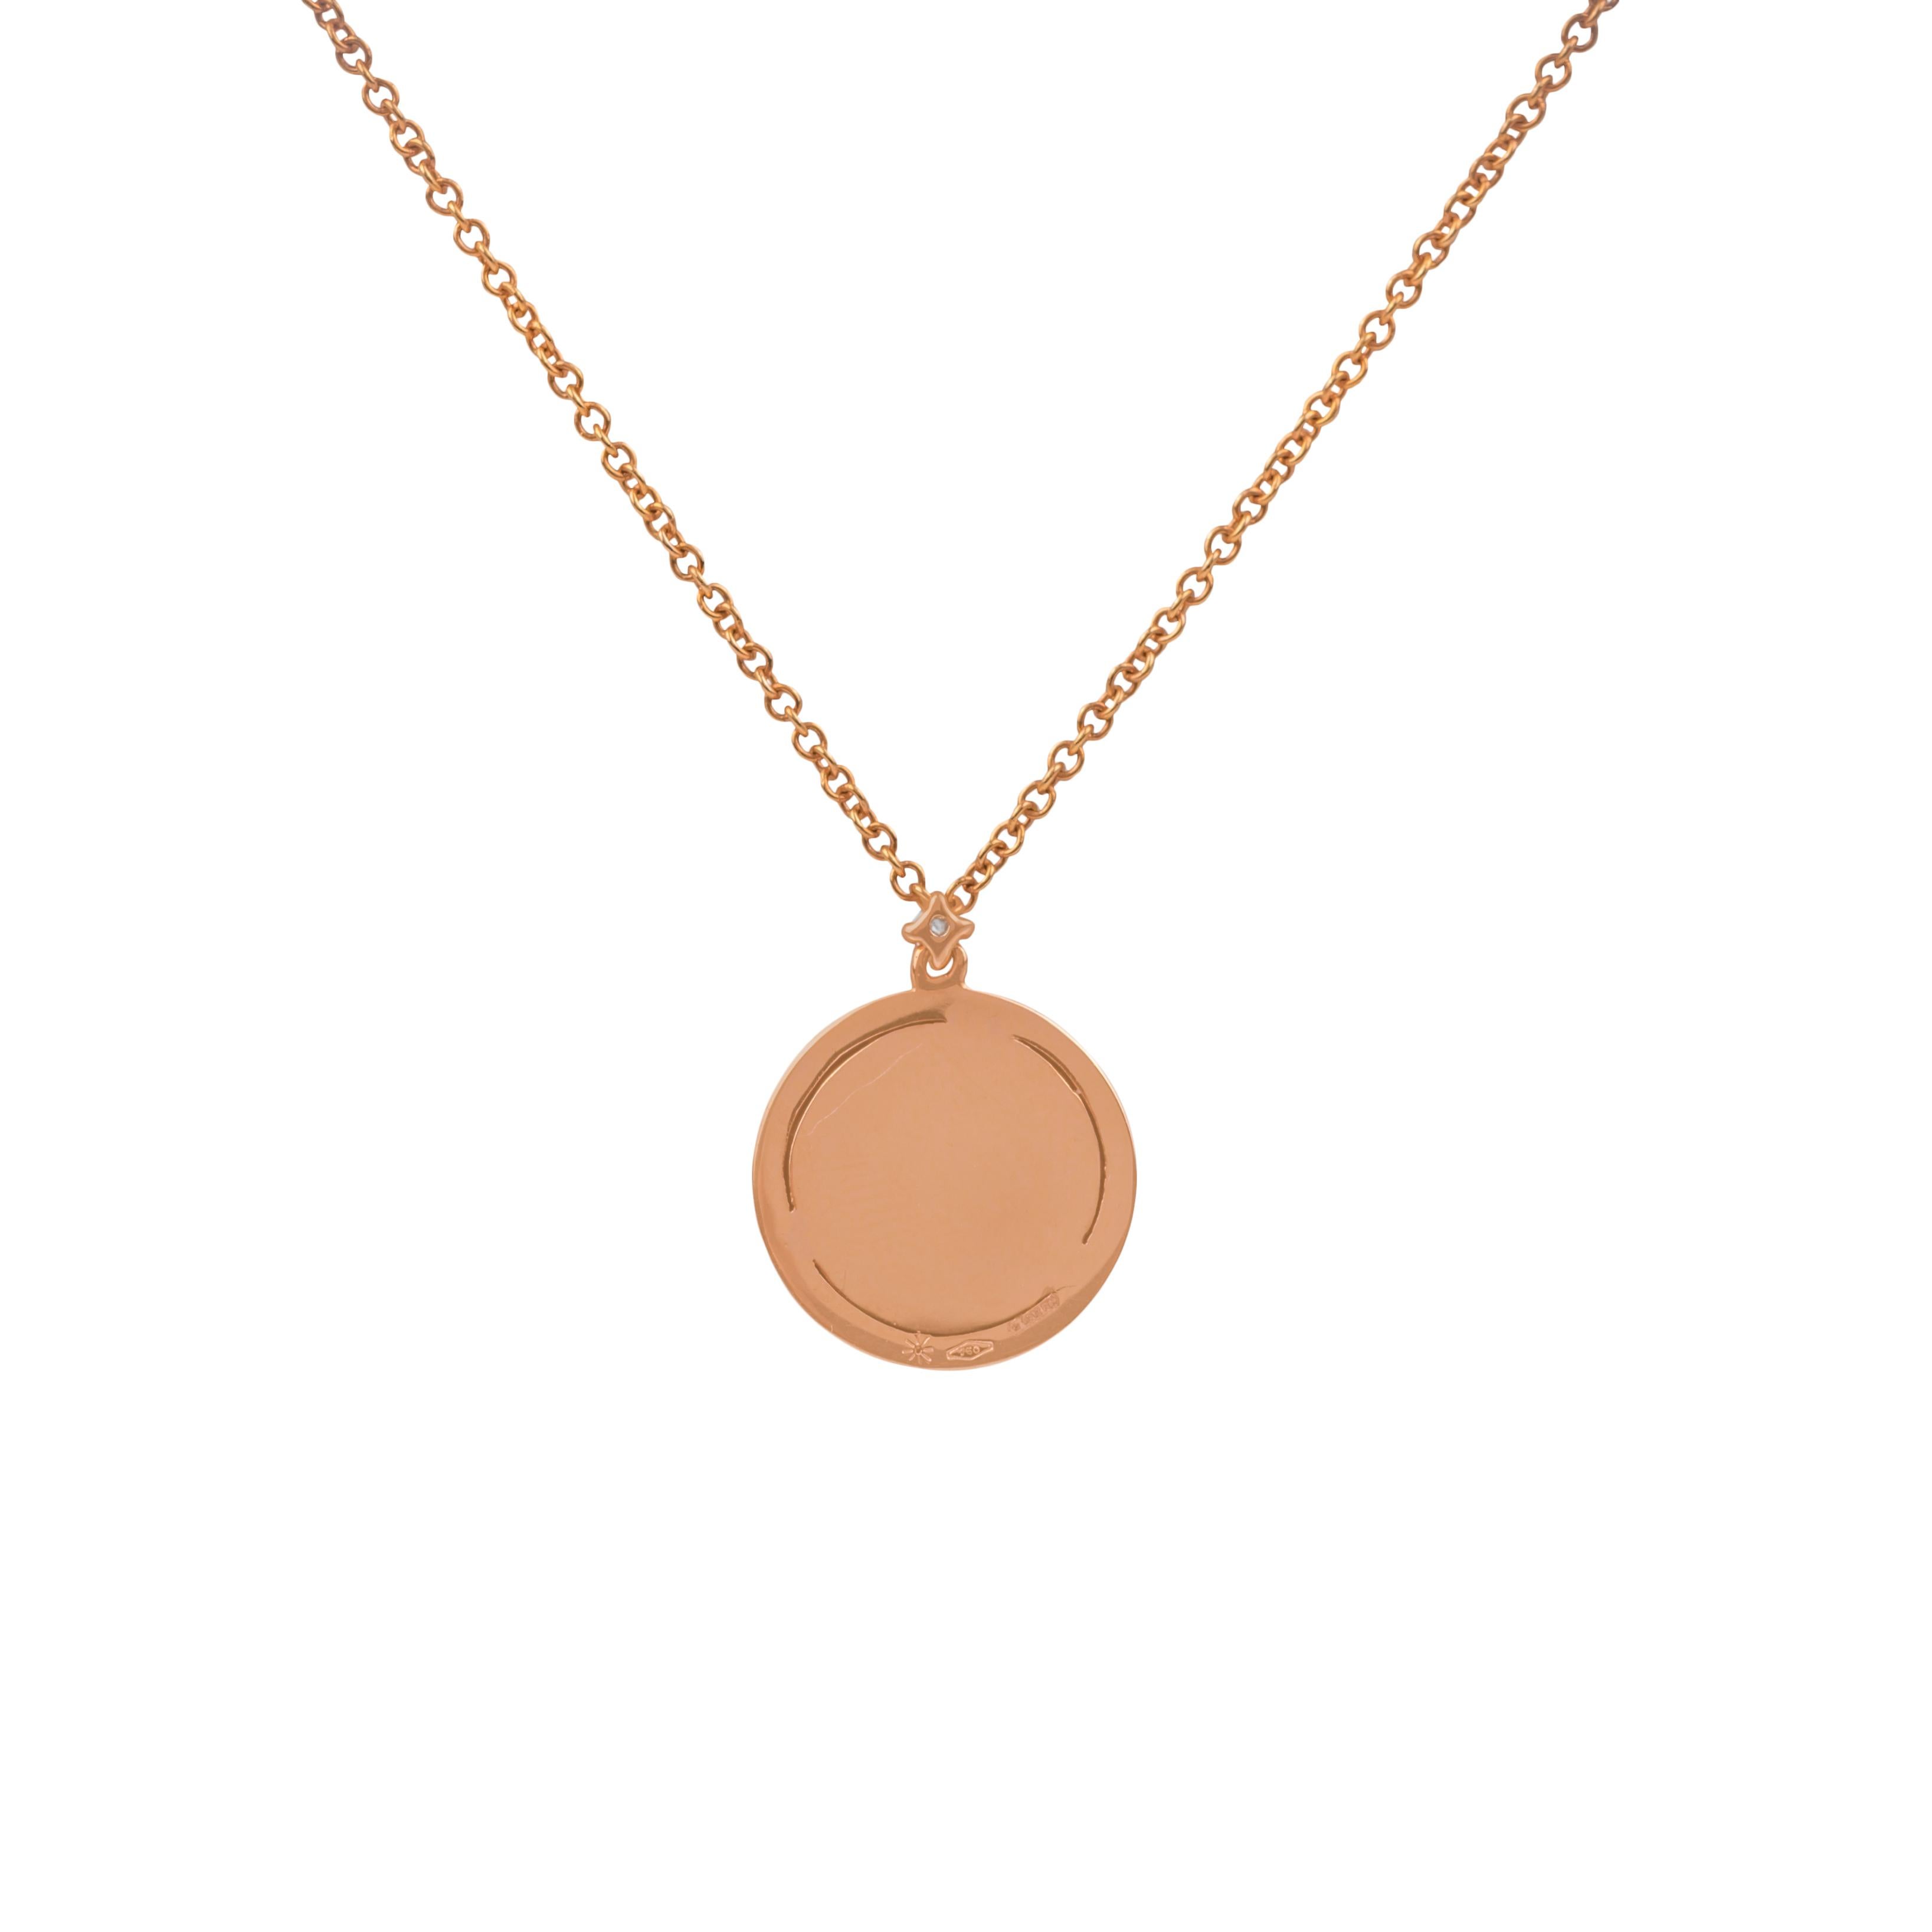 Contemporary 18k Rose Gold and Black Diamonds Pendant Necklace